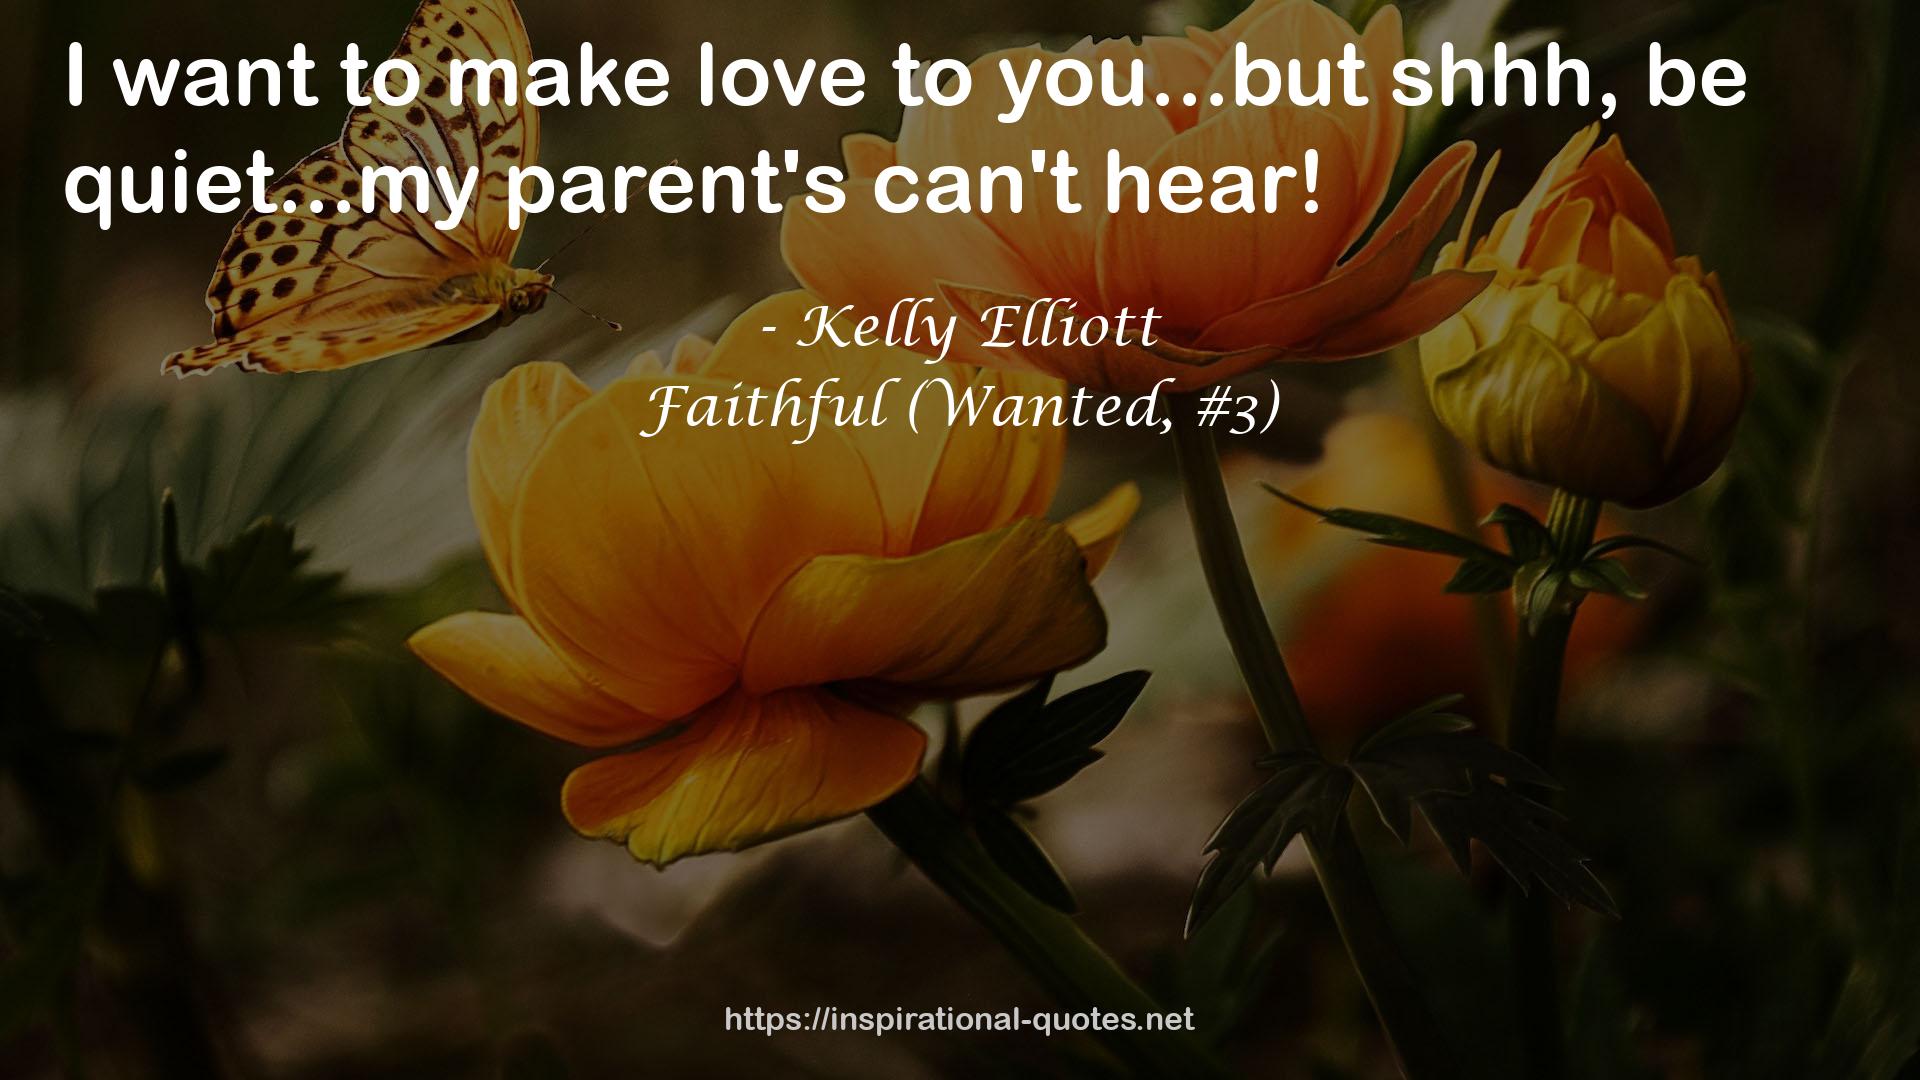 Faithful (Wanted, #3) QUOTES